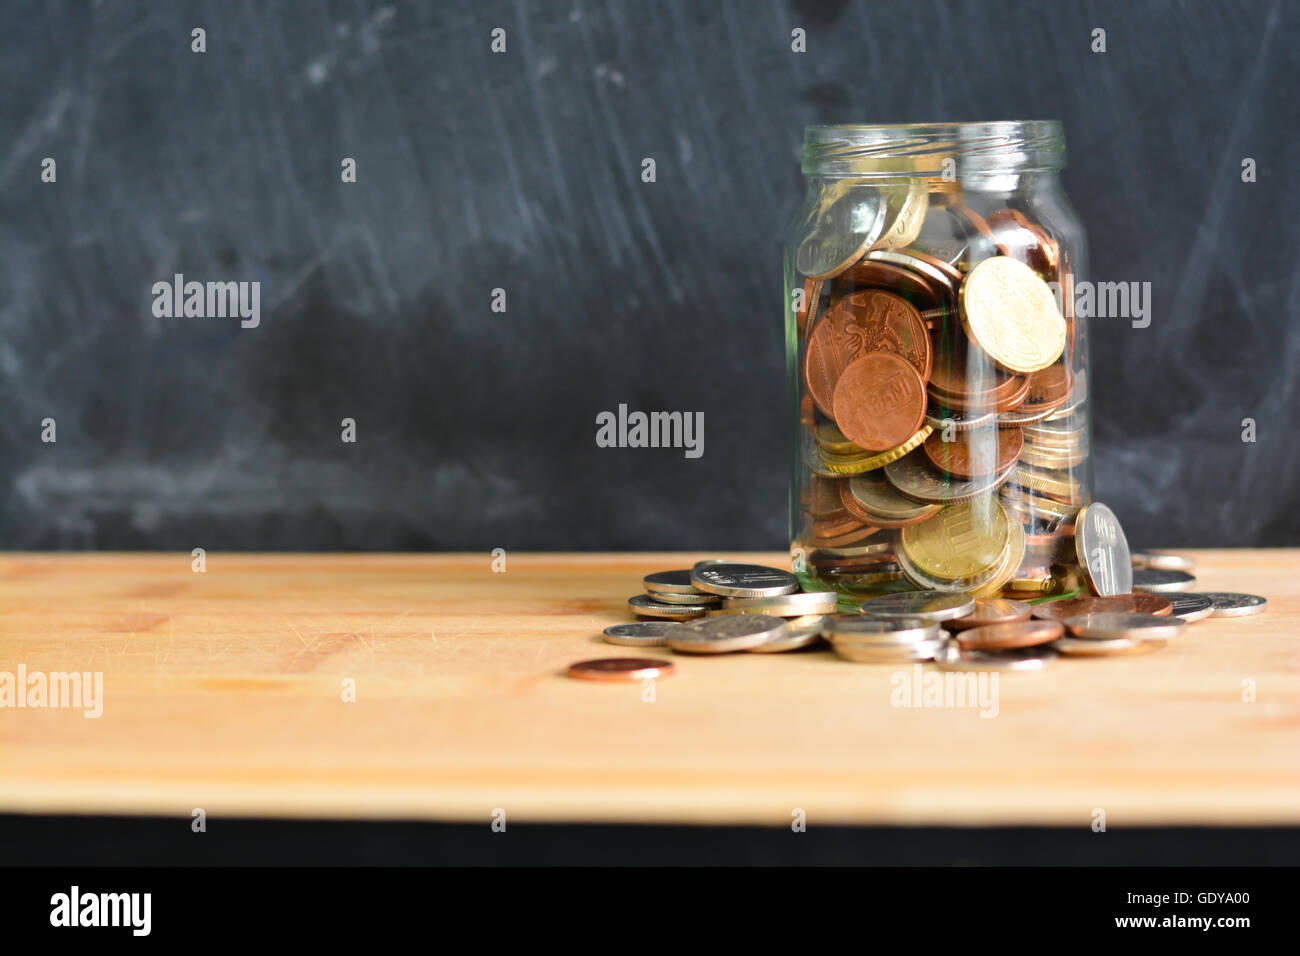 Personal savings concept illustrated with money in a jar Stock Photo